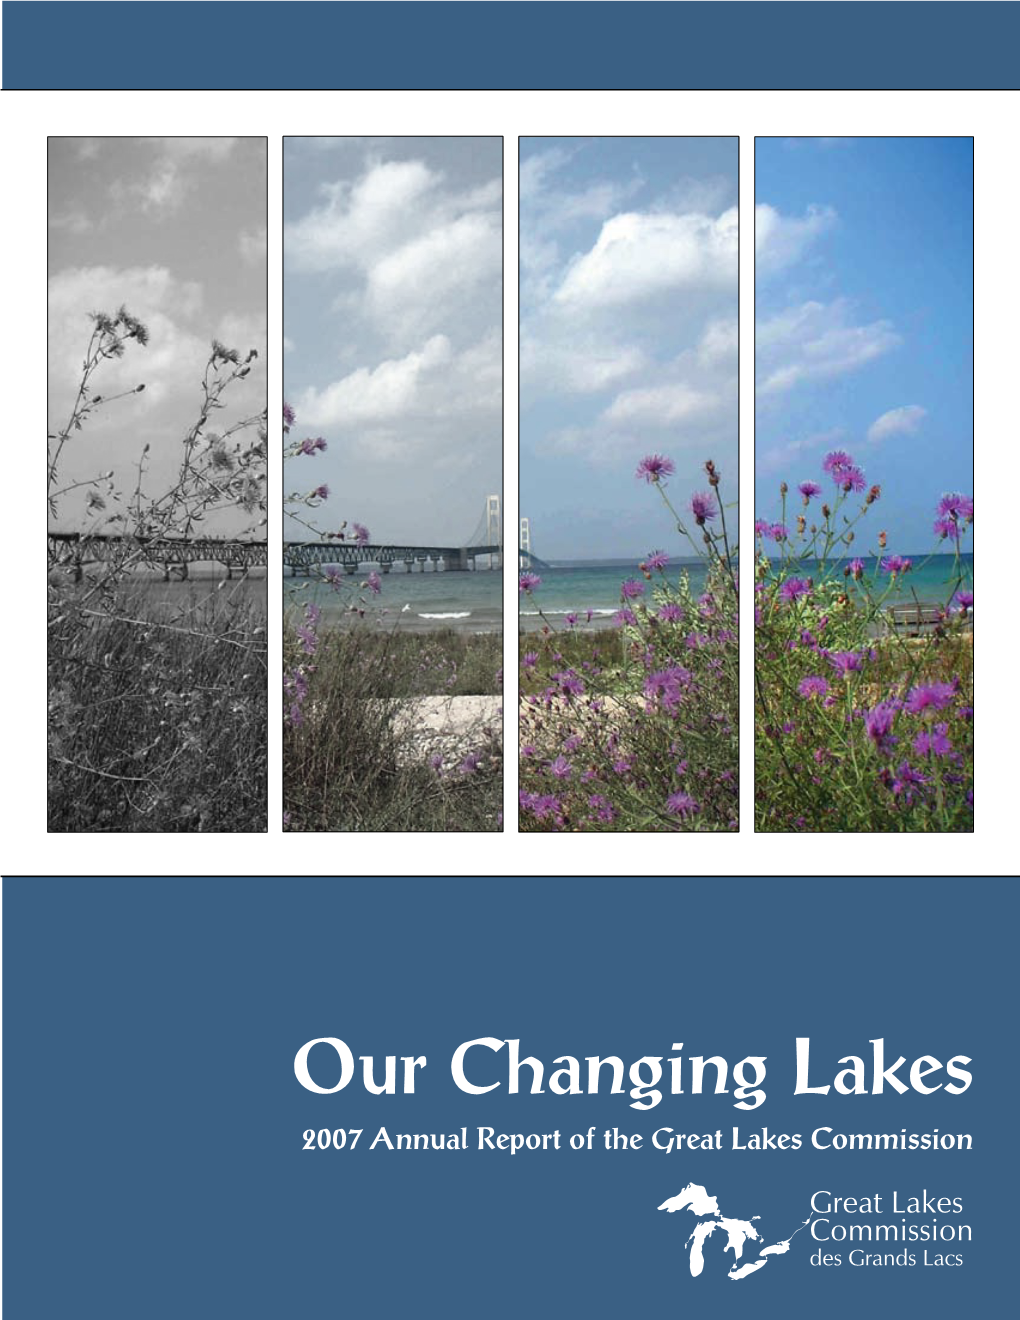 Great Lakes Commission Annual Report